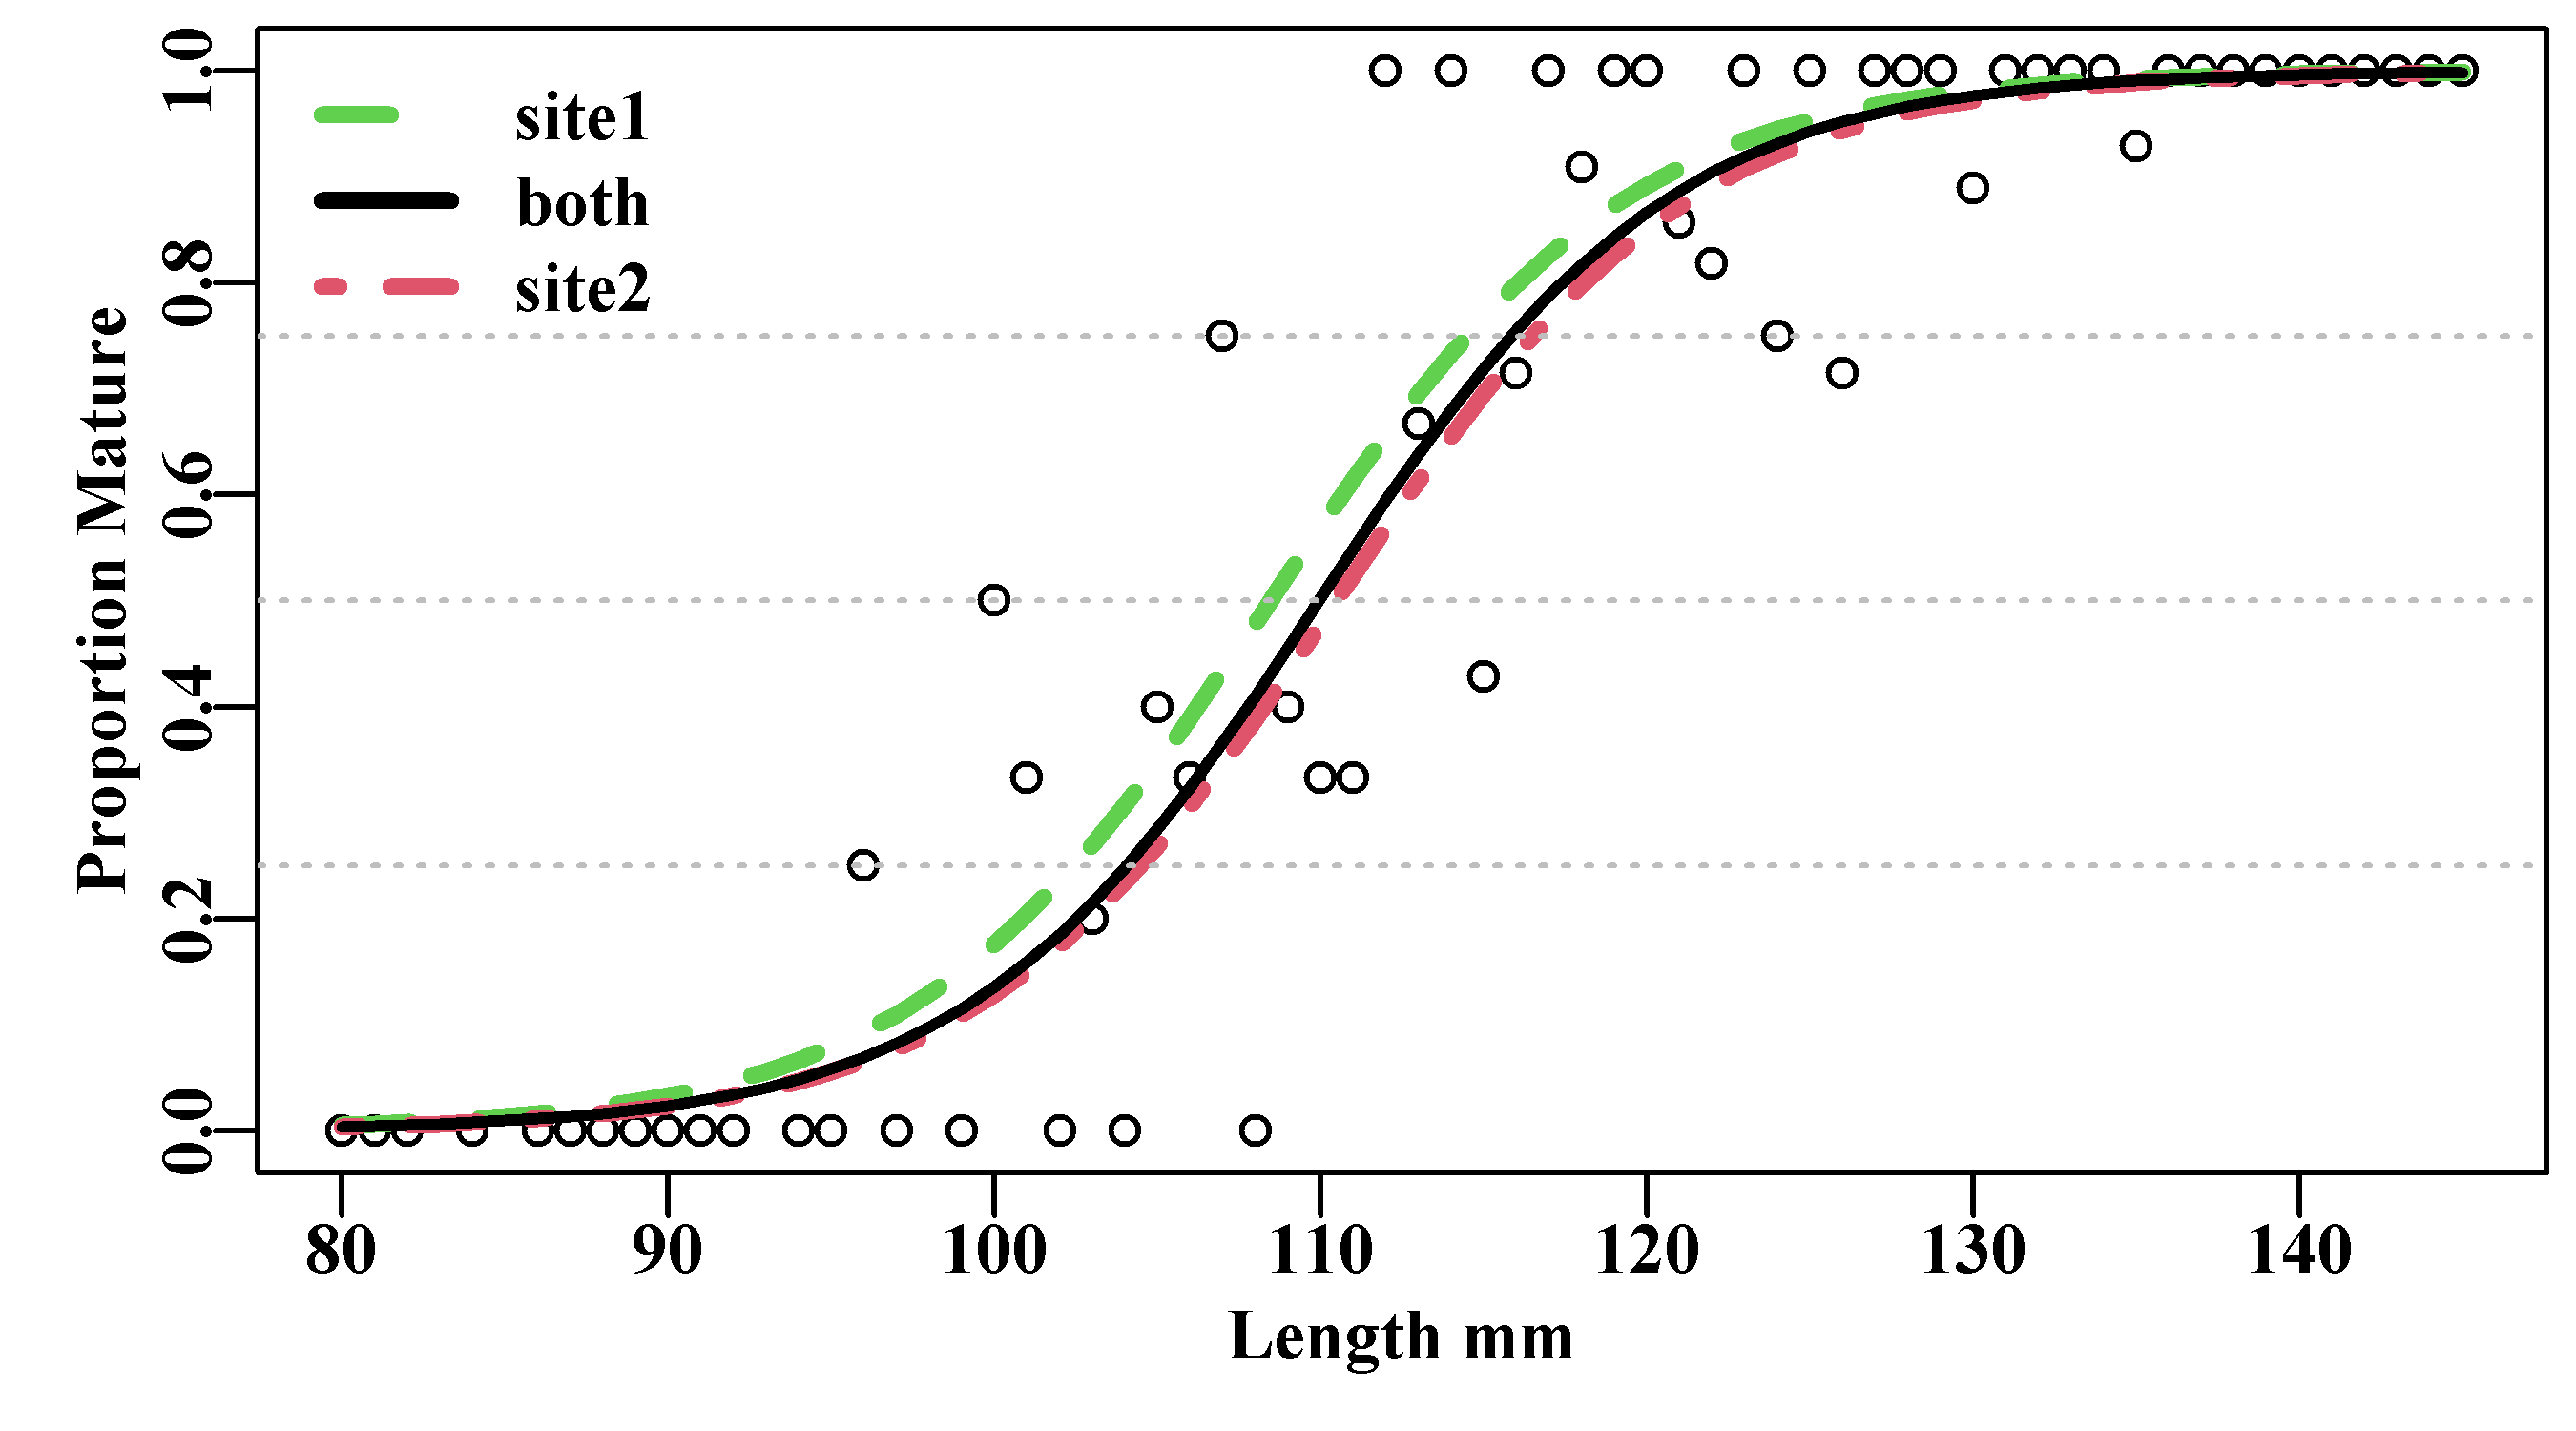 Proportion mature at length for blacklip abalone maturity data (tasab data-set). The combined analysis, without site (both) is closer to site 2 (dot-dash) than site 1 (dashes), which reflects site 2’s larger sample size.